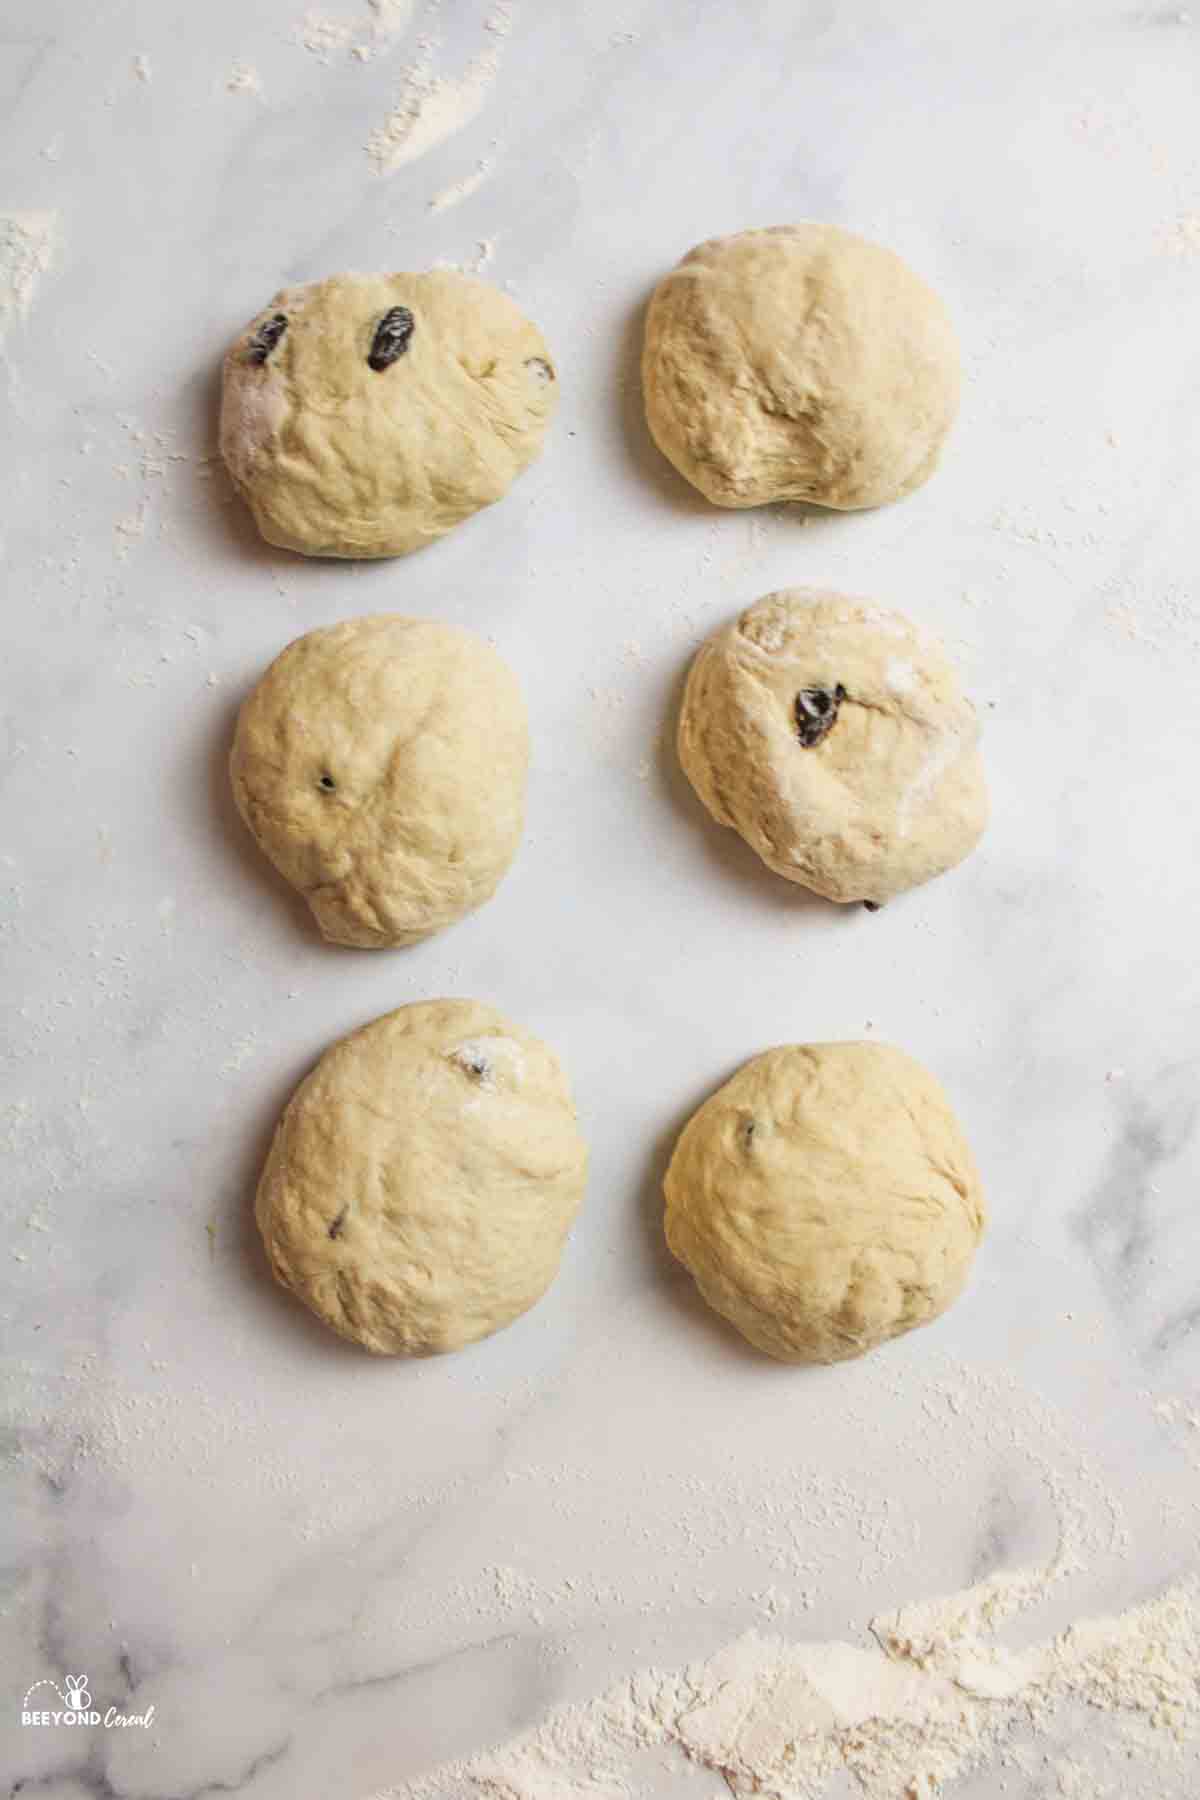 cinnamon raisin bagel dough divided into 6 sections and on a floured surface.